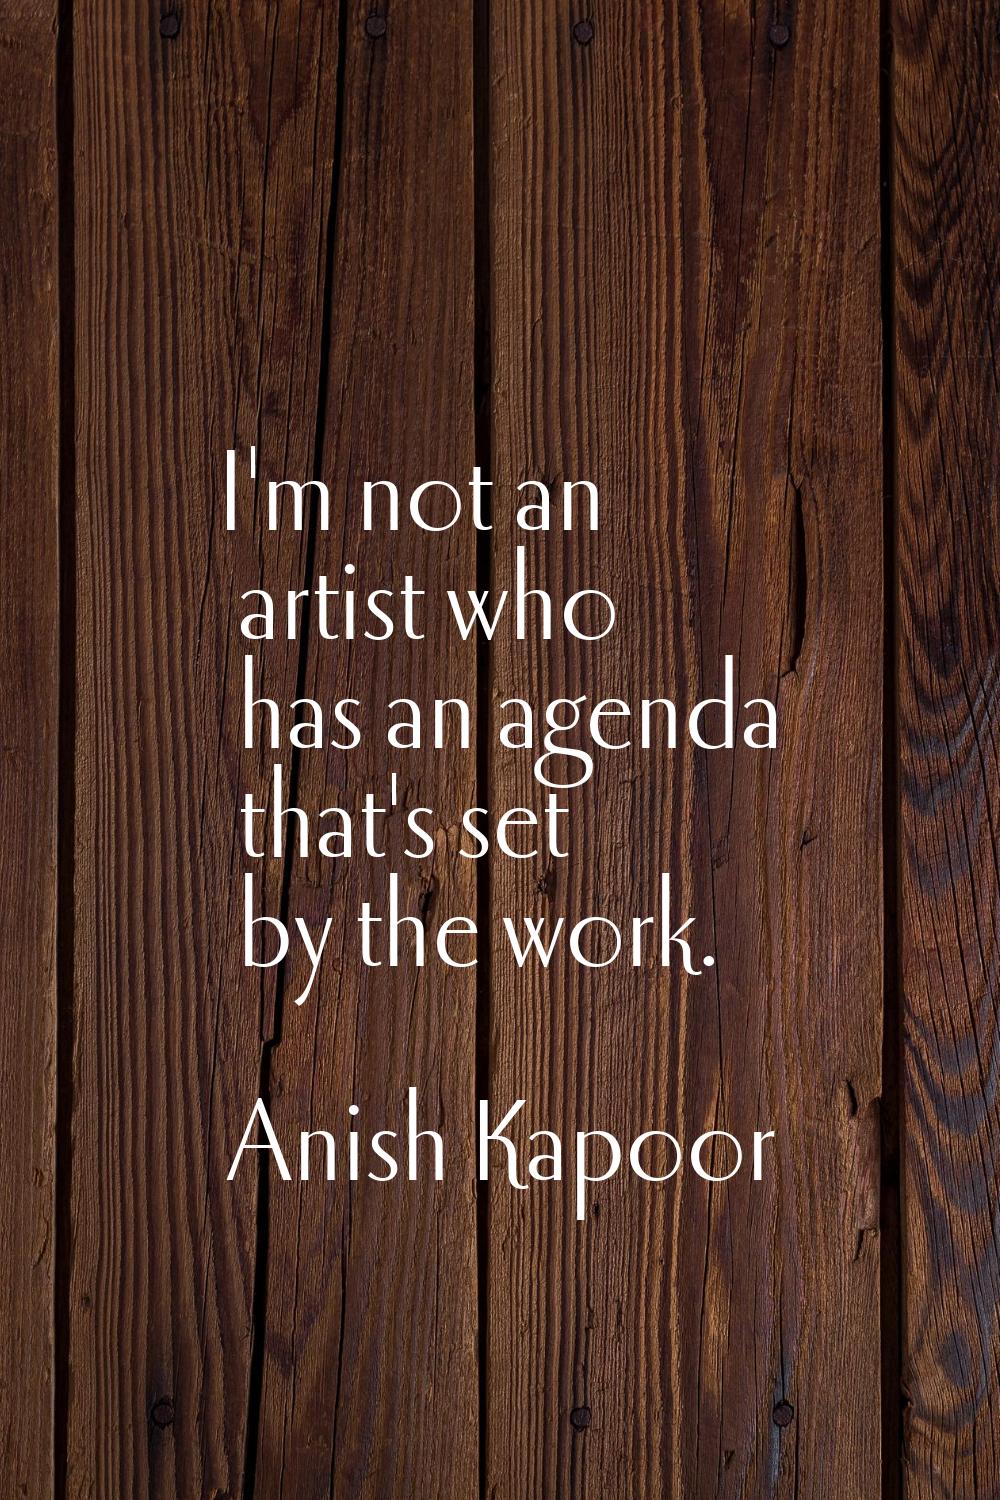 I'm not an artist who has an agenda that's set by the work.